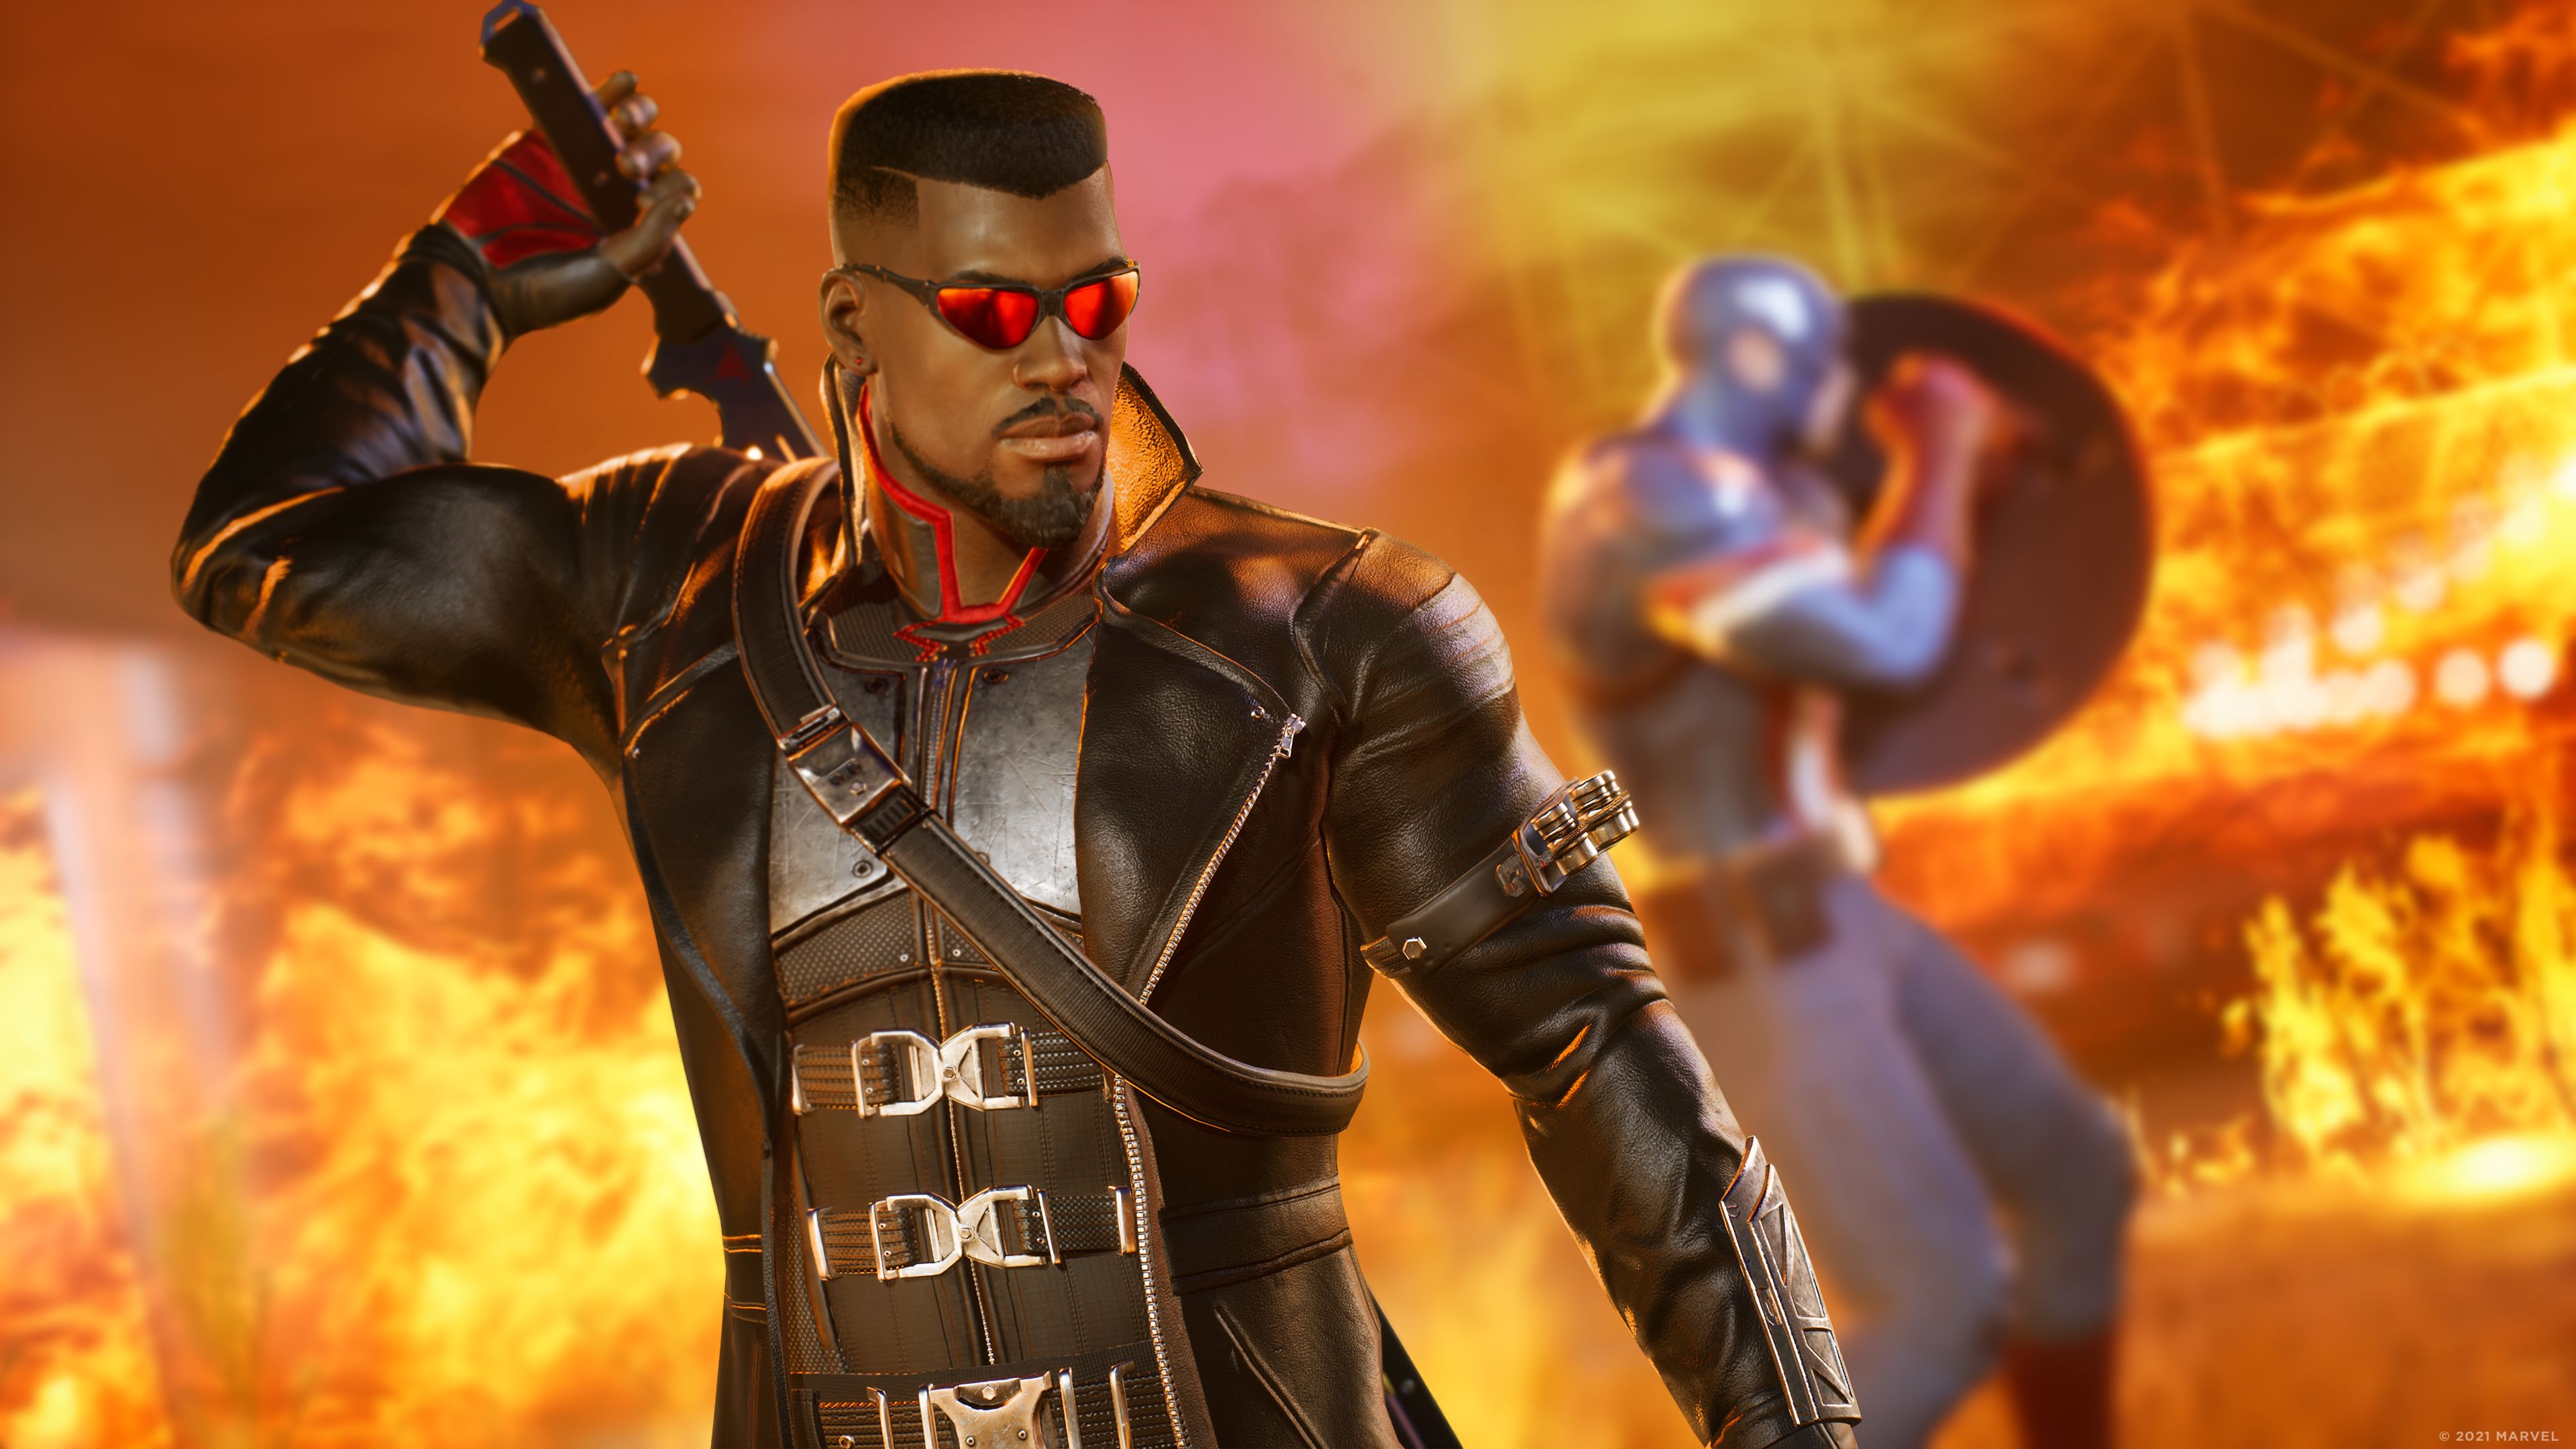 Marvel's Midnight Suns Legendary Edition For PS5 on PS5 — price history,  screenshots, discounts • USA